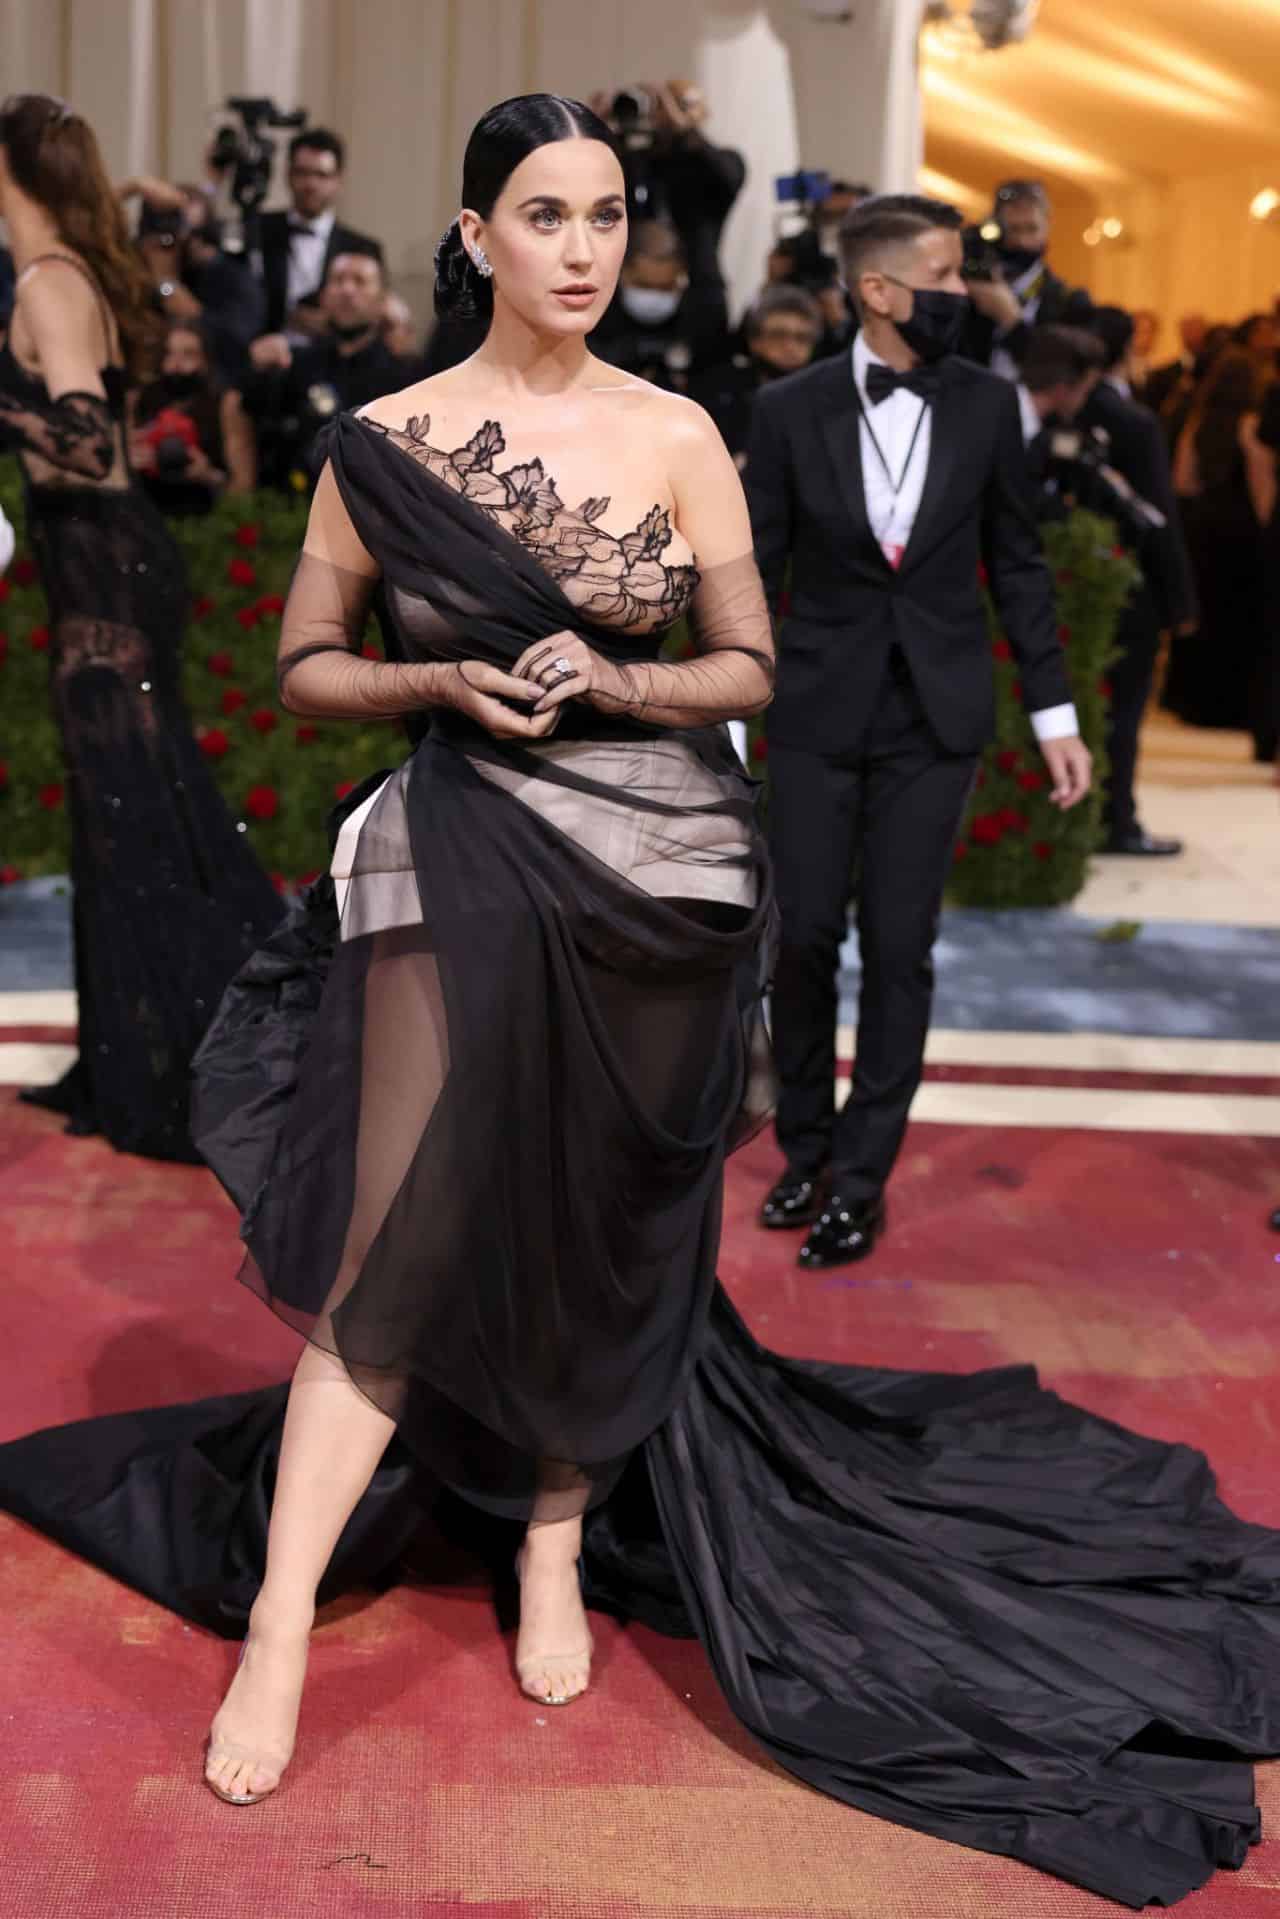 Katy Perry Channels Old Hollywood Glamour at Met Gala